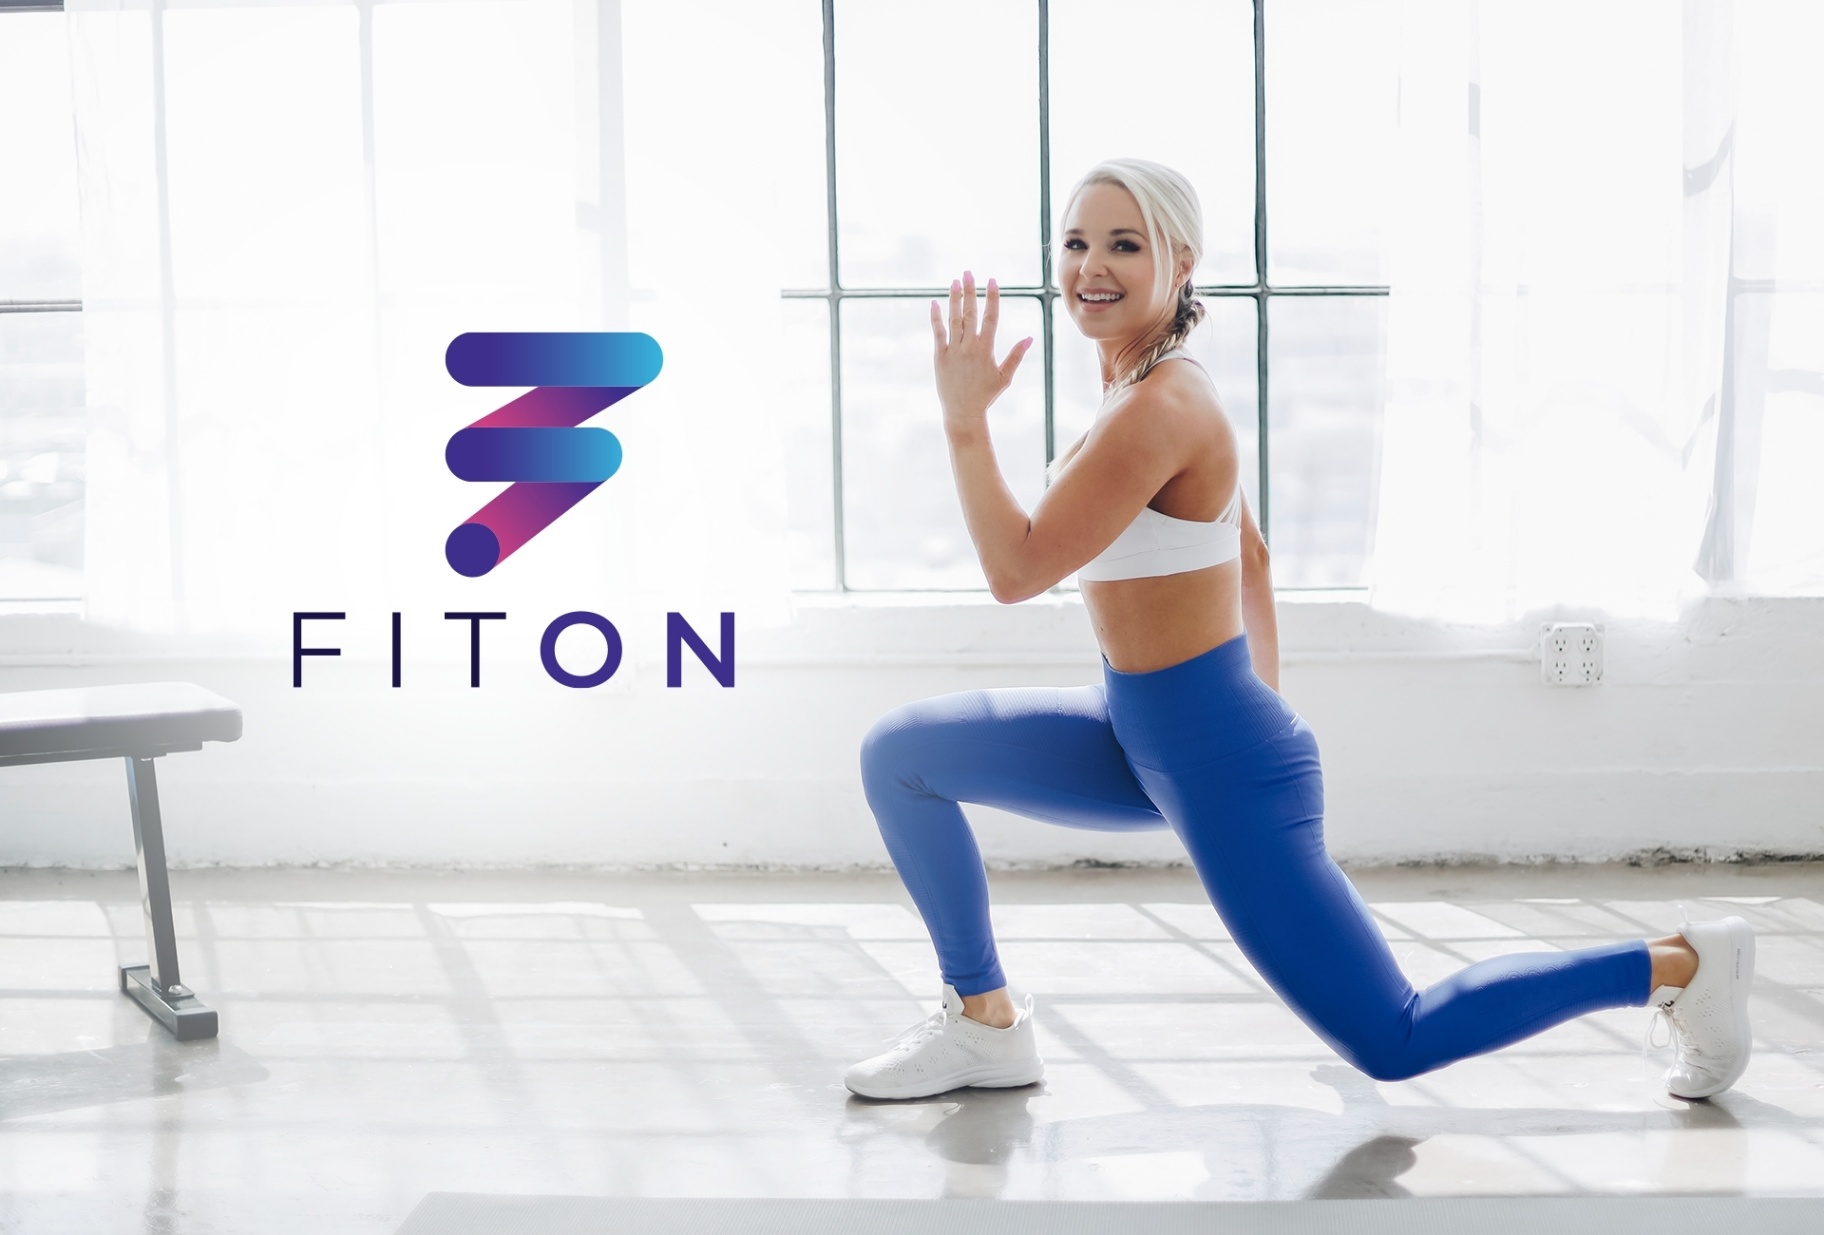 FitOn App - Learn How to Download